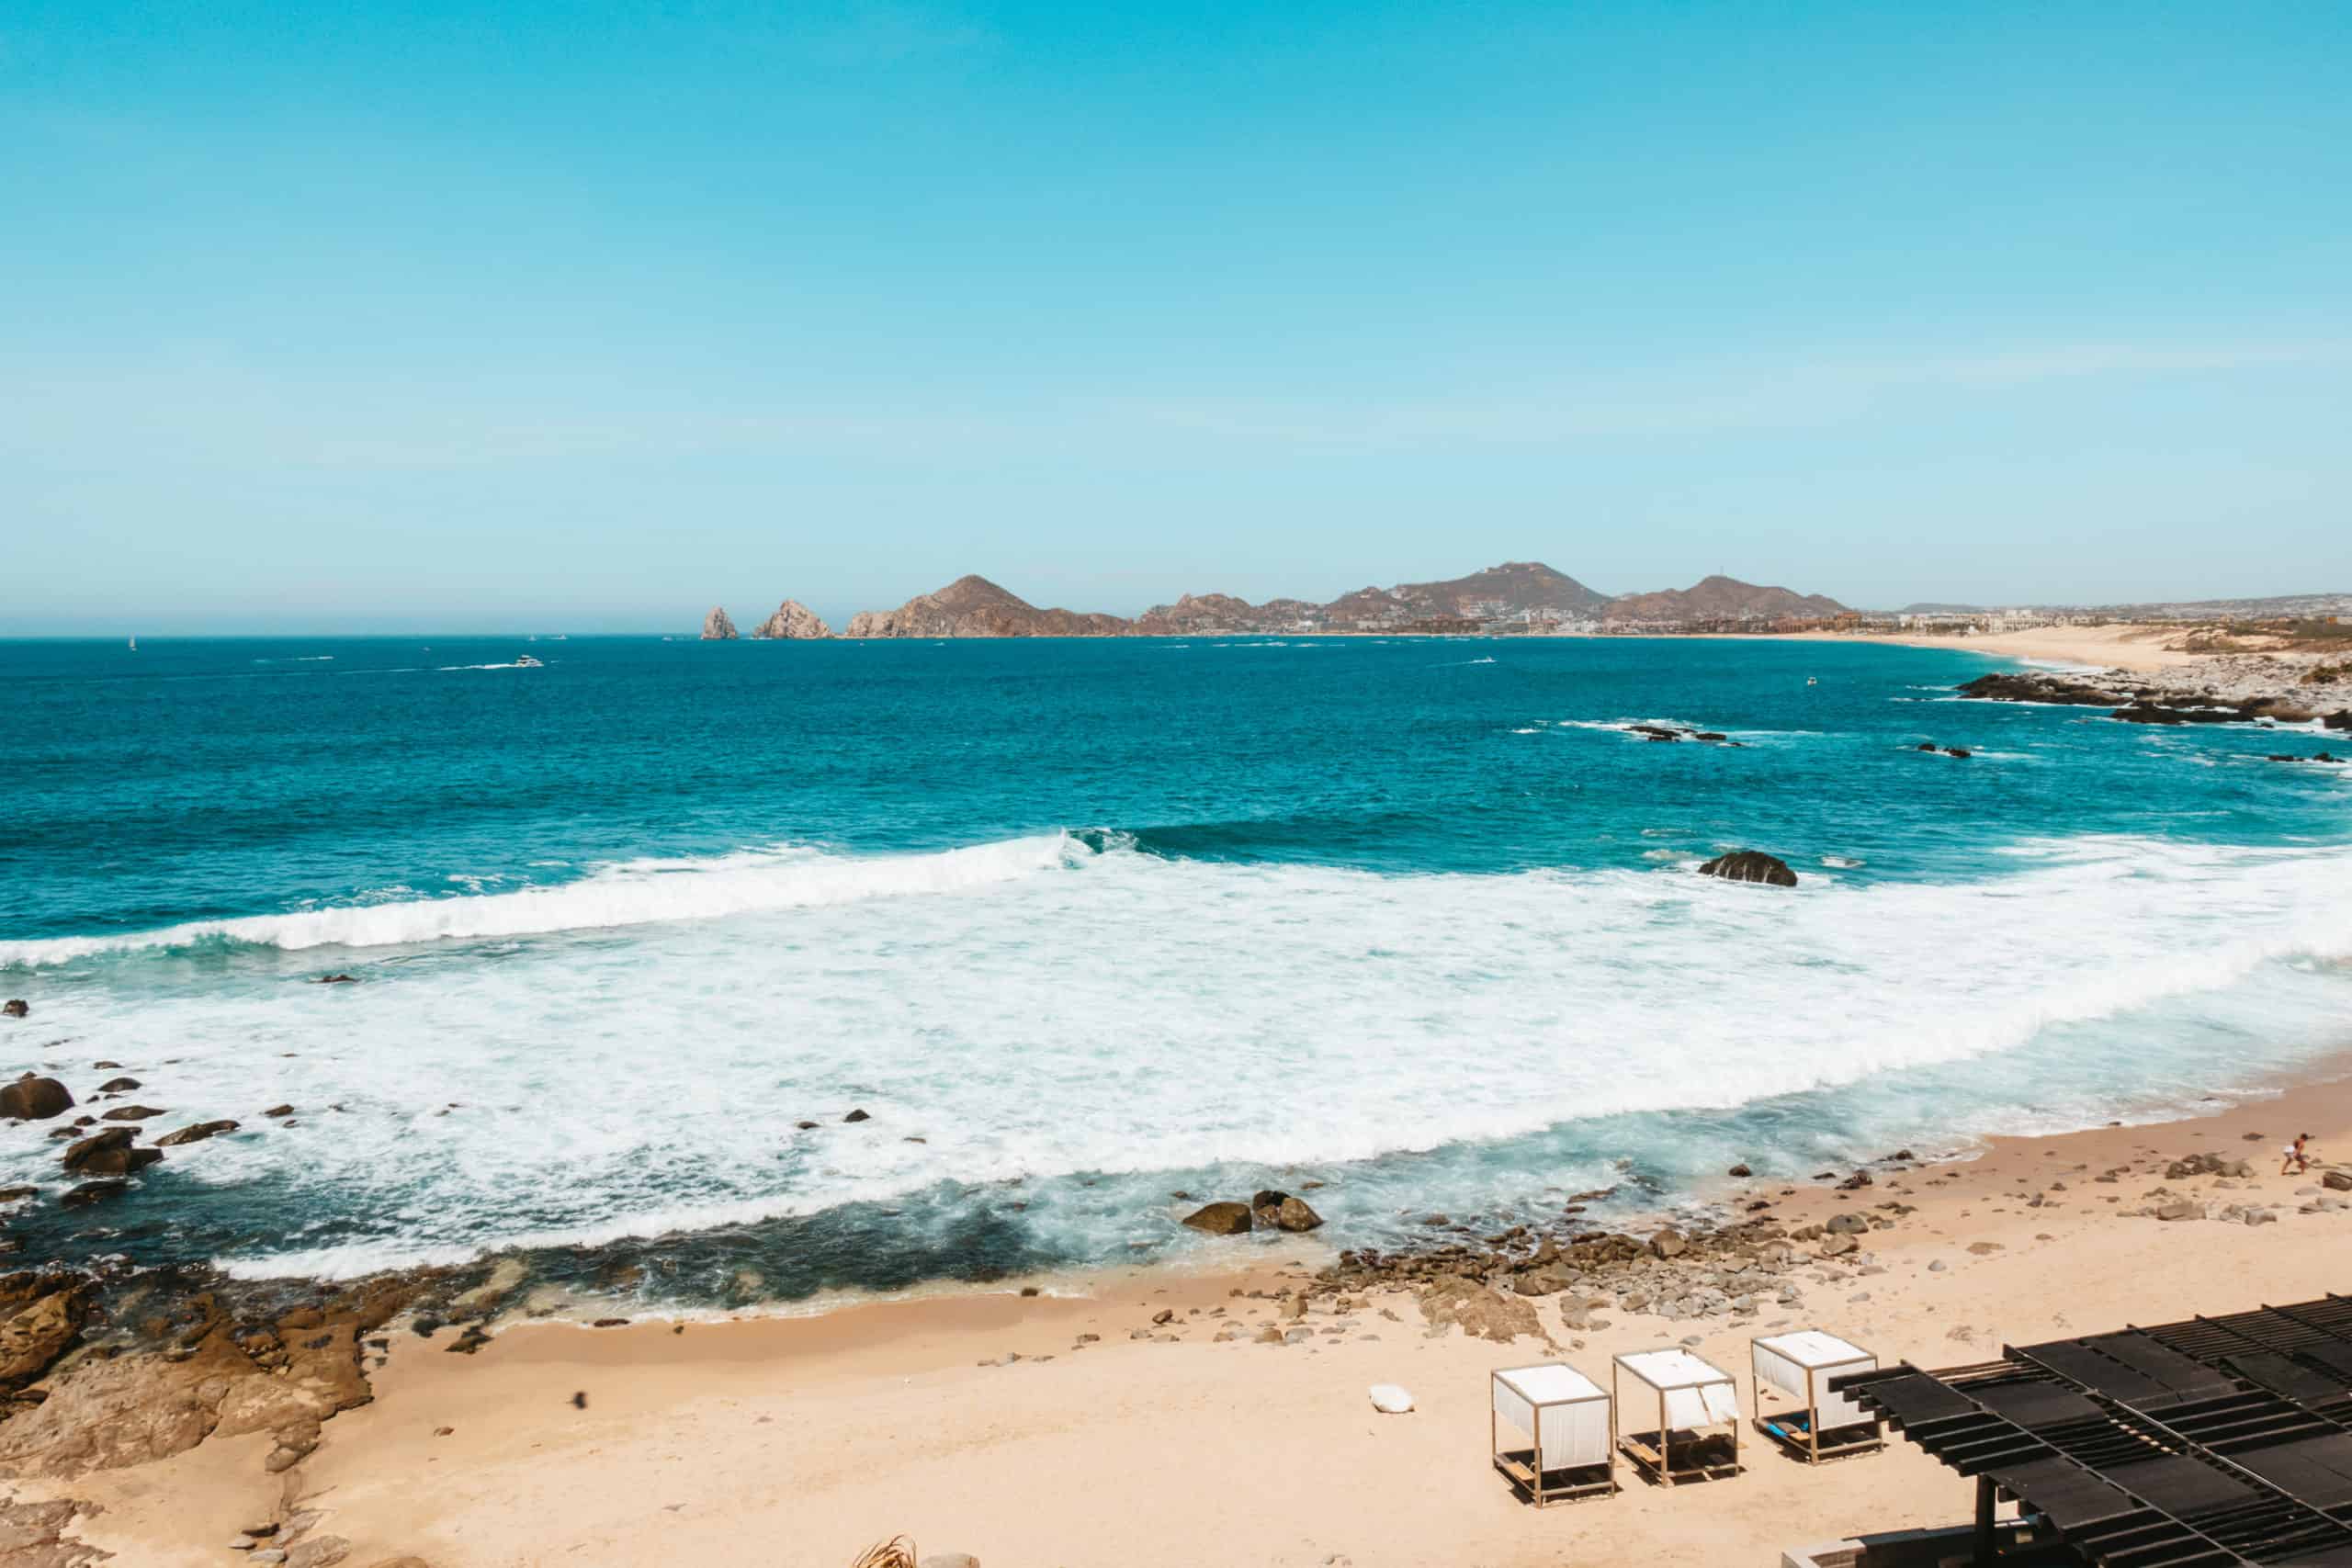 Beach area and view of the arch at the Cape Thompson in Cabo San Lucas, Mexico